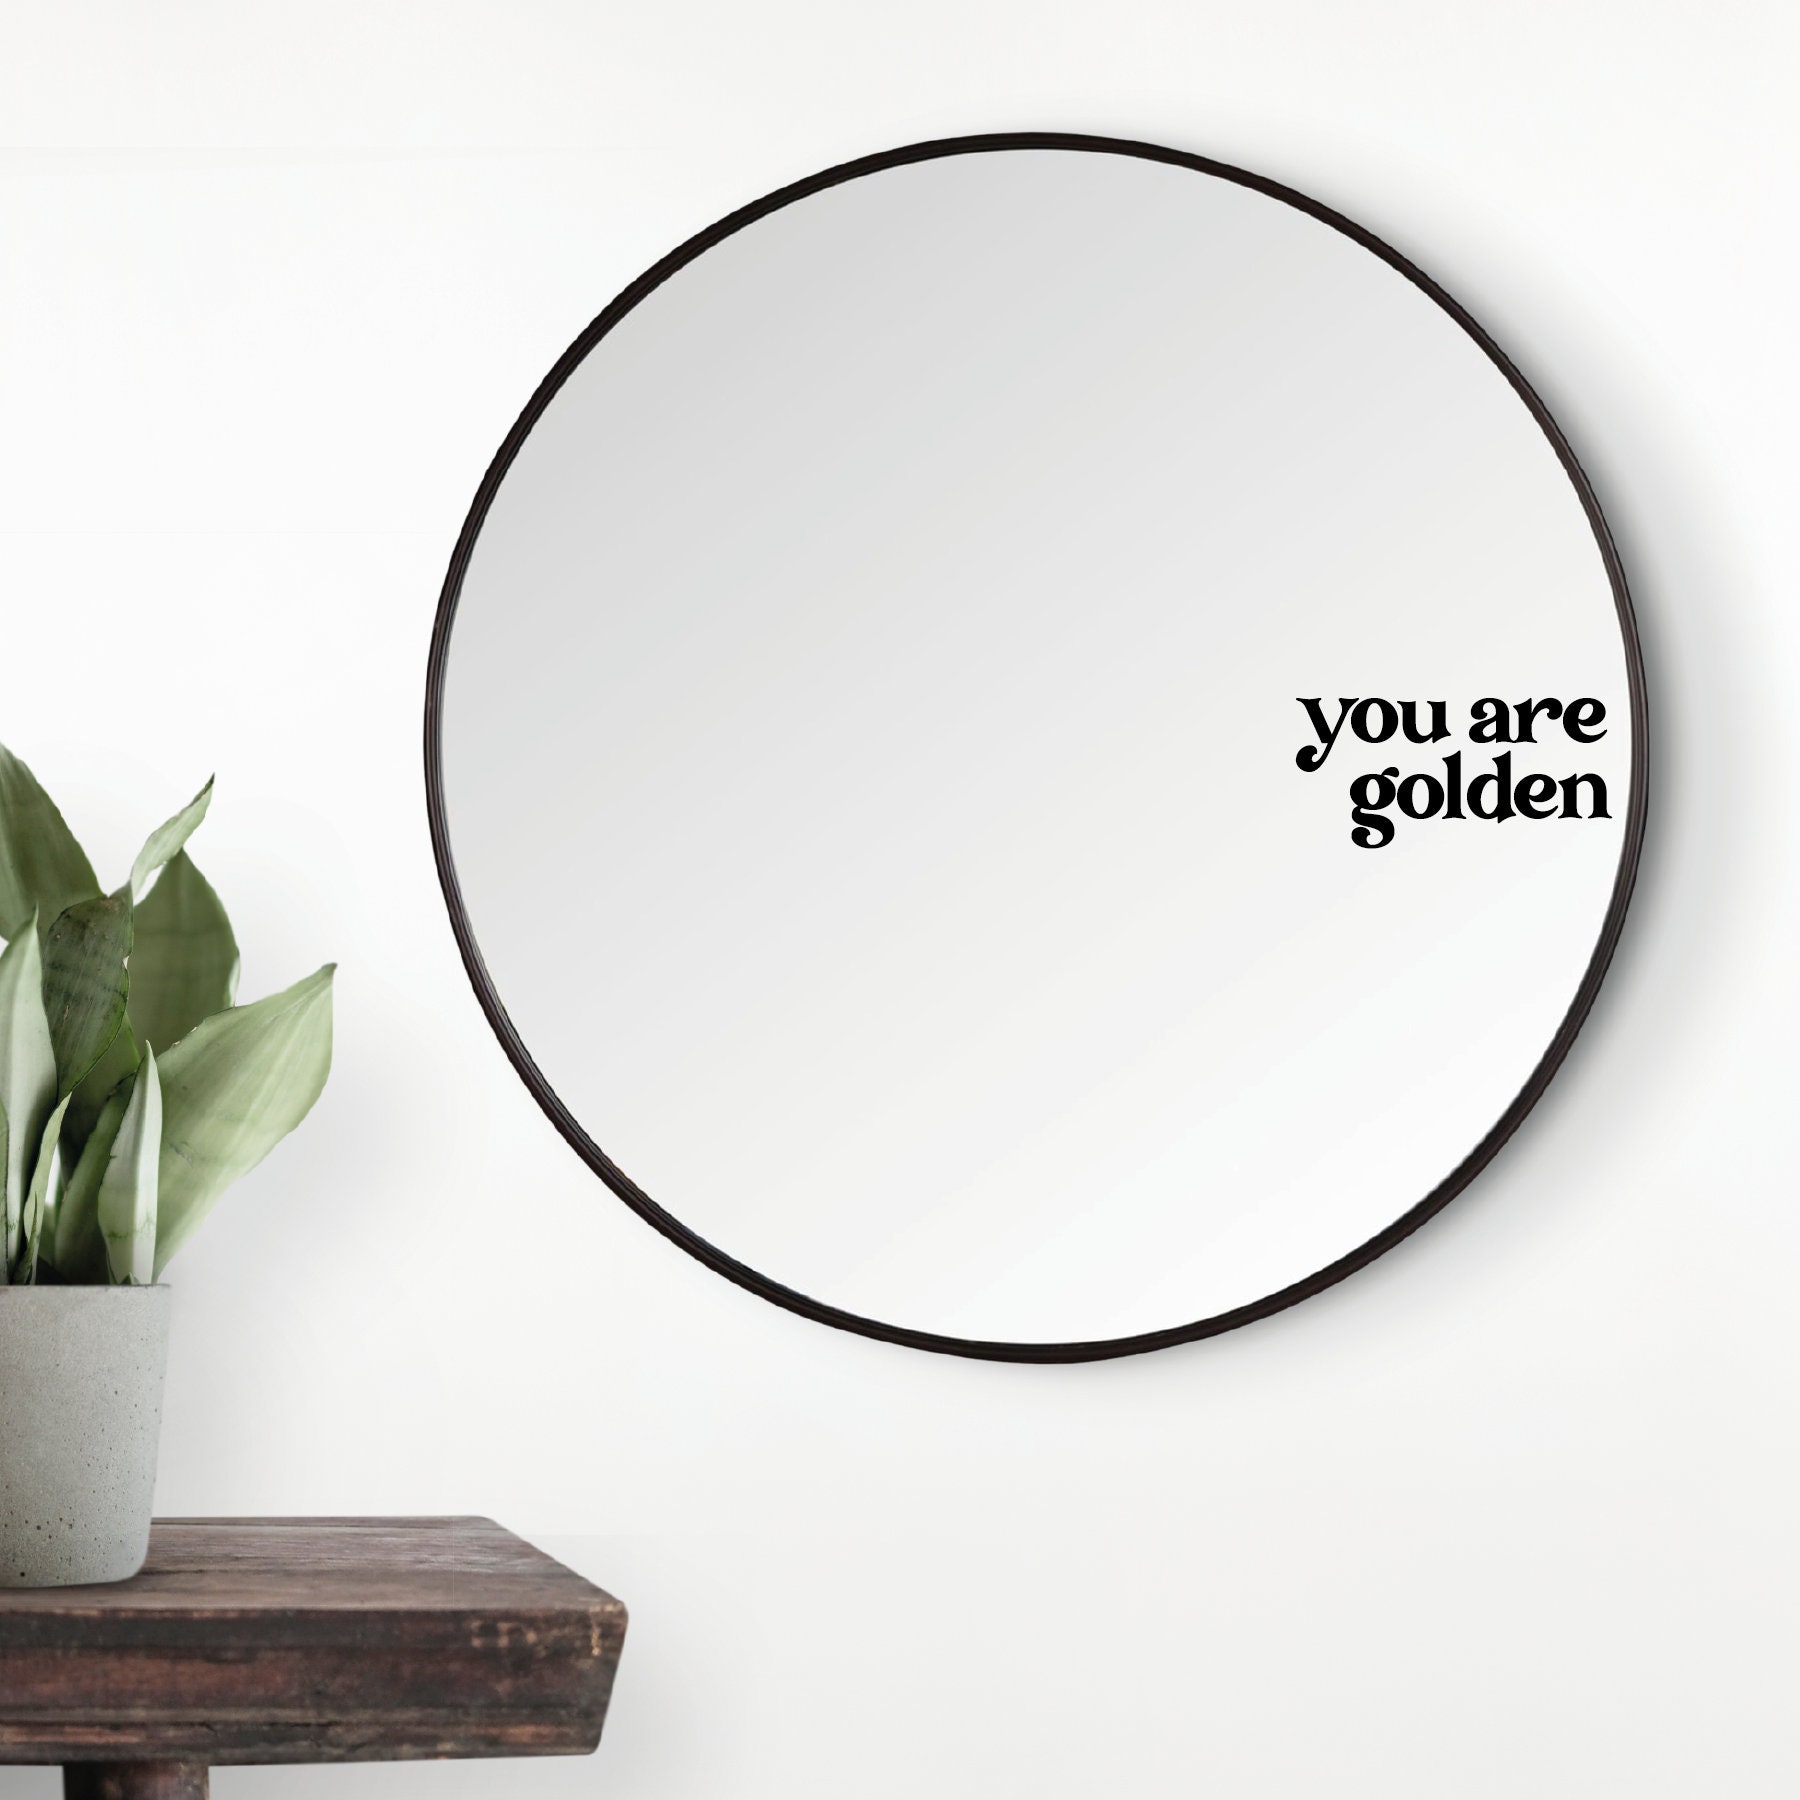 Positive Affirmation Mirror Sticker You're So Golden Mirror Decal Self Love Sticker Gift For BFF Vinyl Decal Bridesmaid Gift